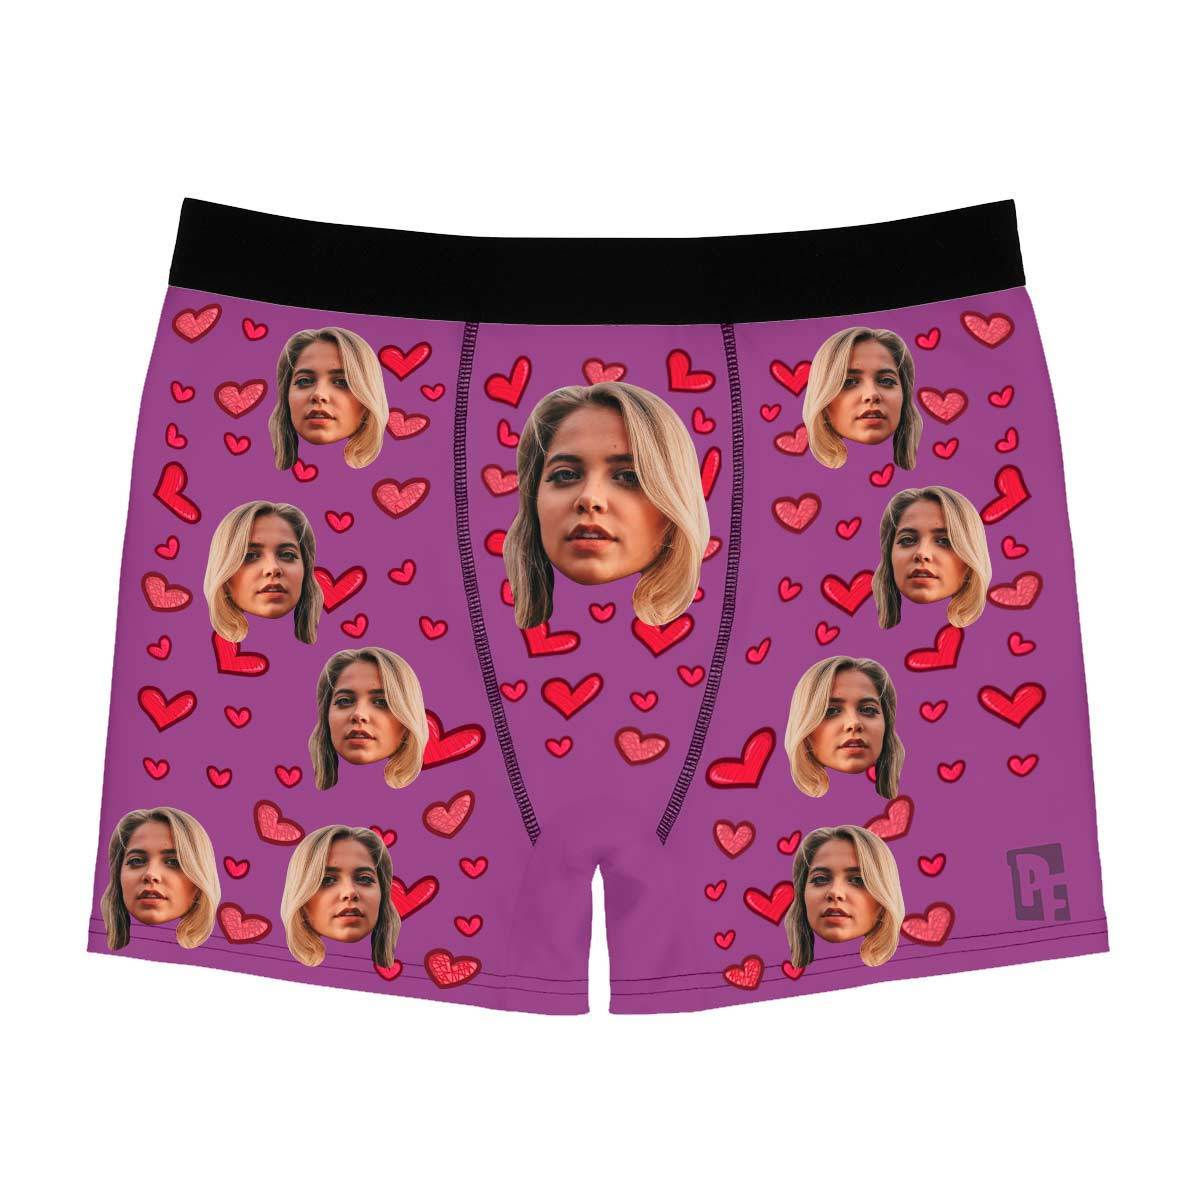 Red Heart men's boxer briefs personalized with photo printed on them